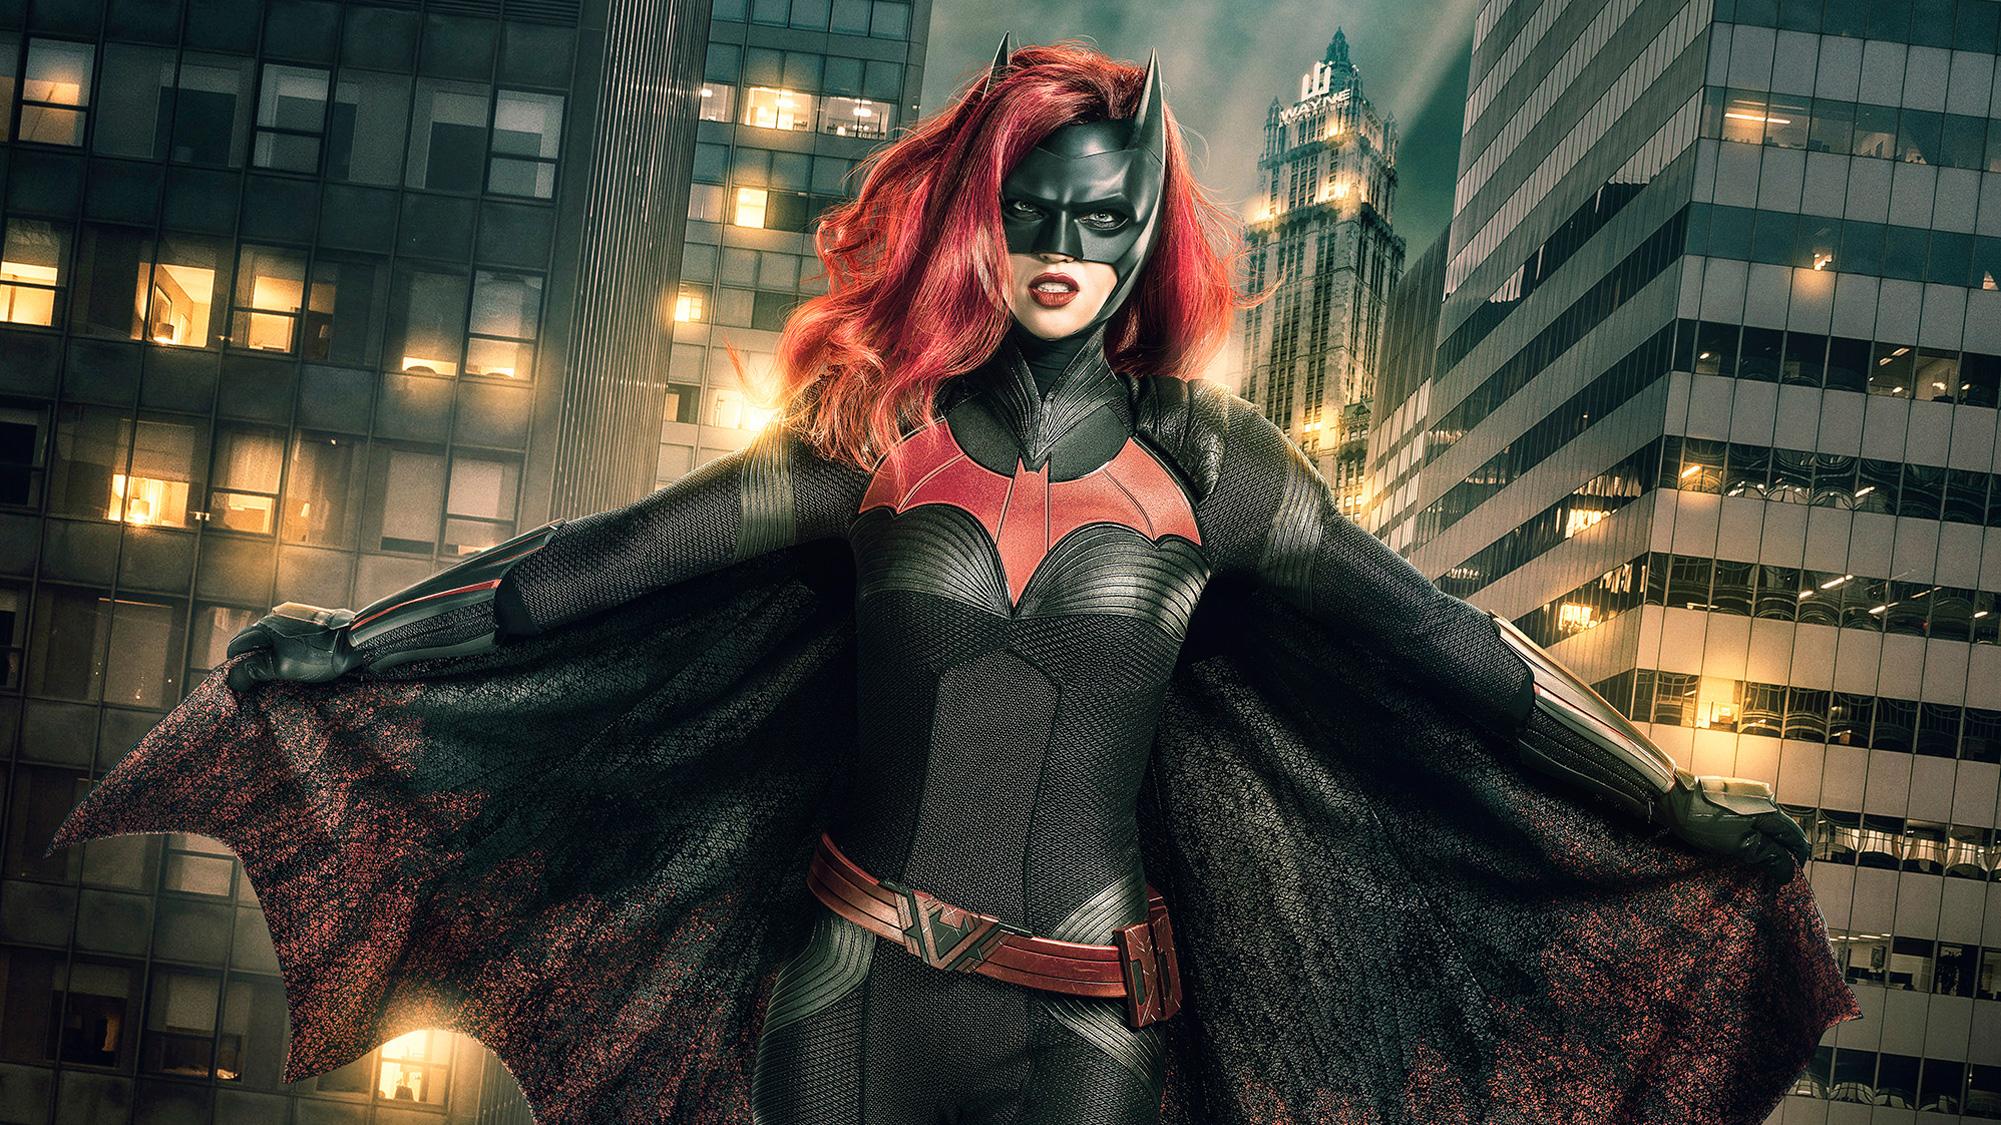 Batwoman Wallpaper - Wall.GiftWatches.CO